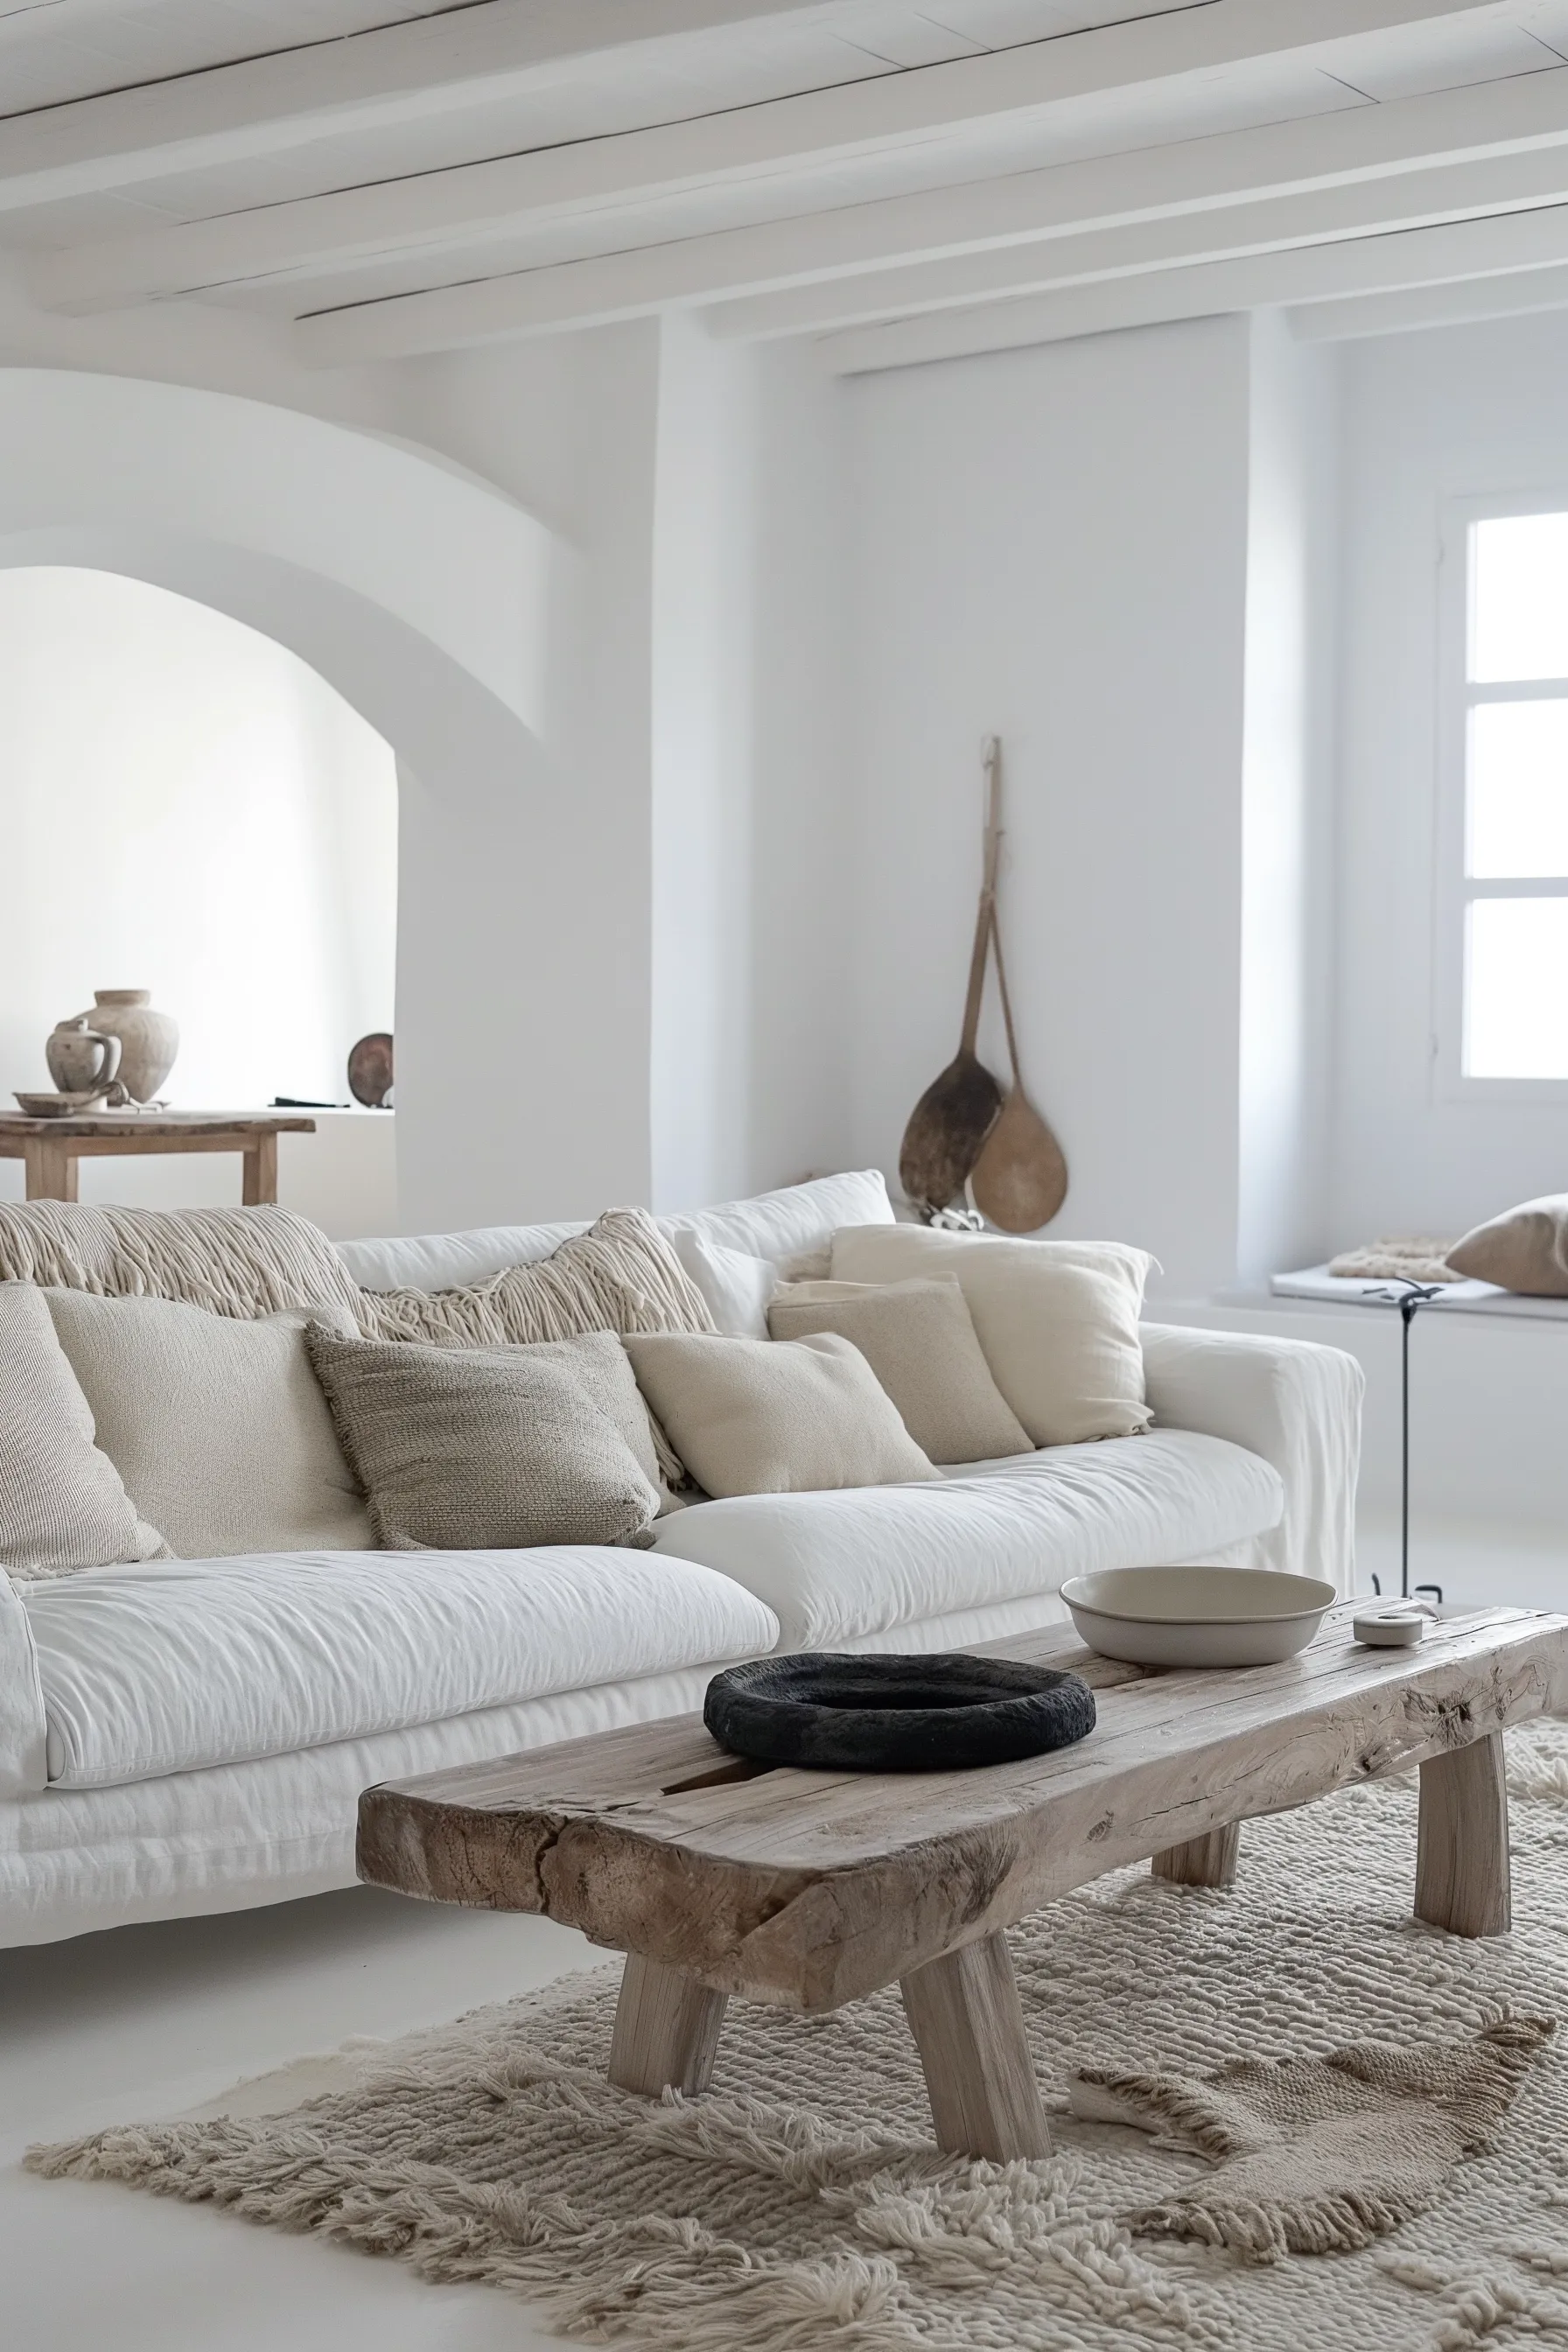 A white living room with a fluffy rug and wooden bench